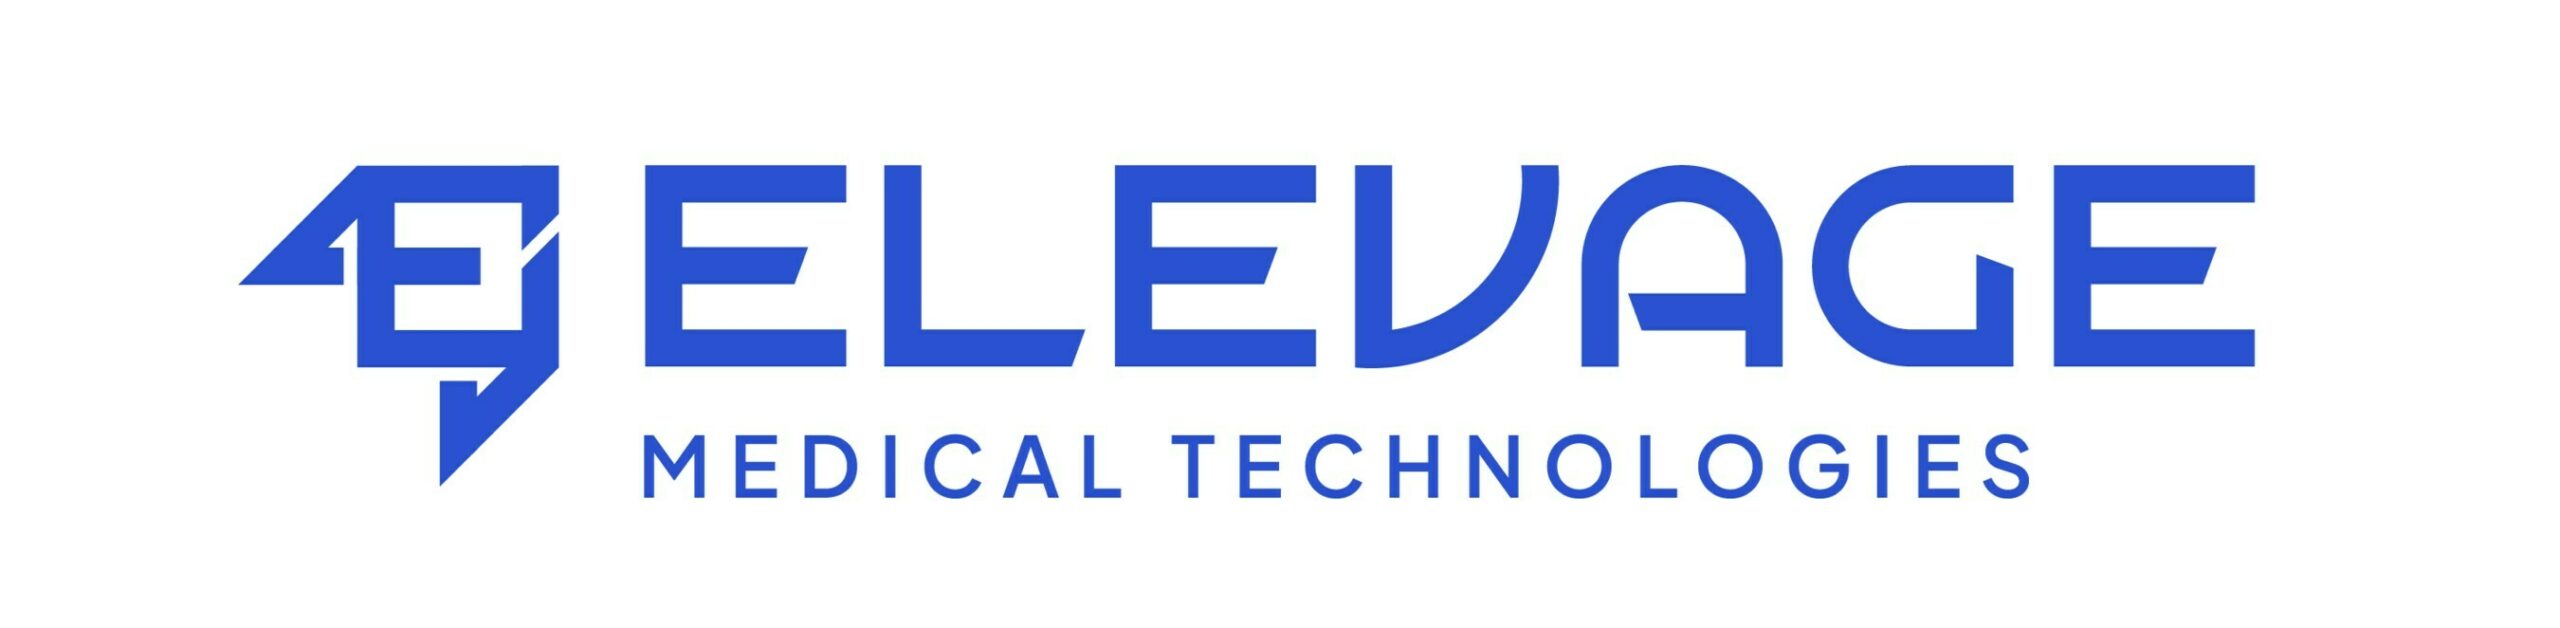 Patient Square Capital Forms Elevage Medical Technologies to Partner with Growth-Stage Medical Device Companies